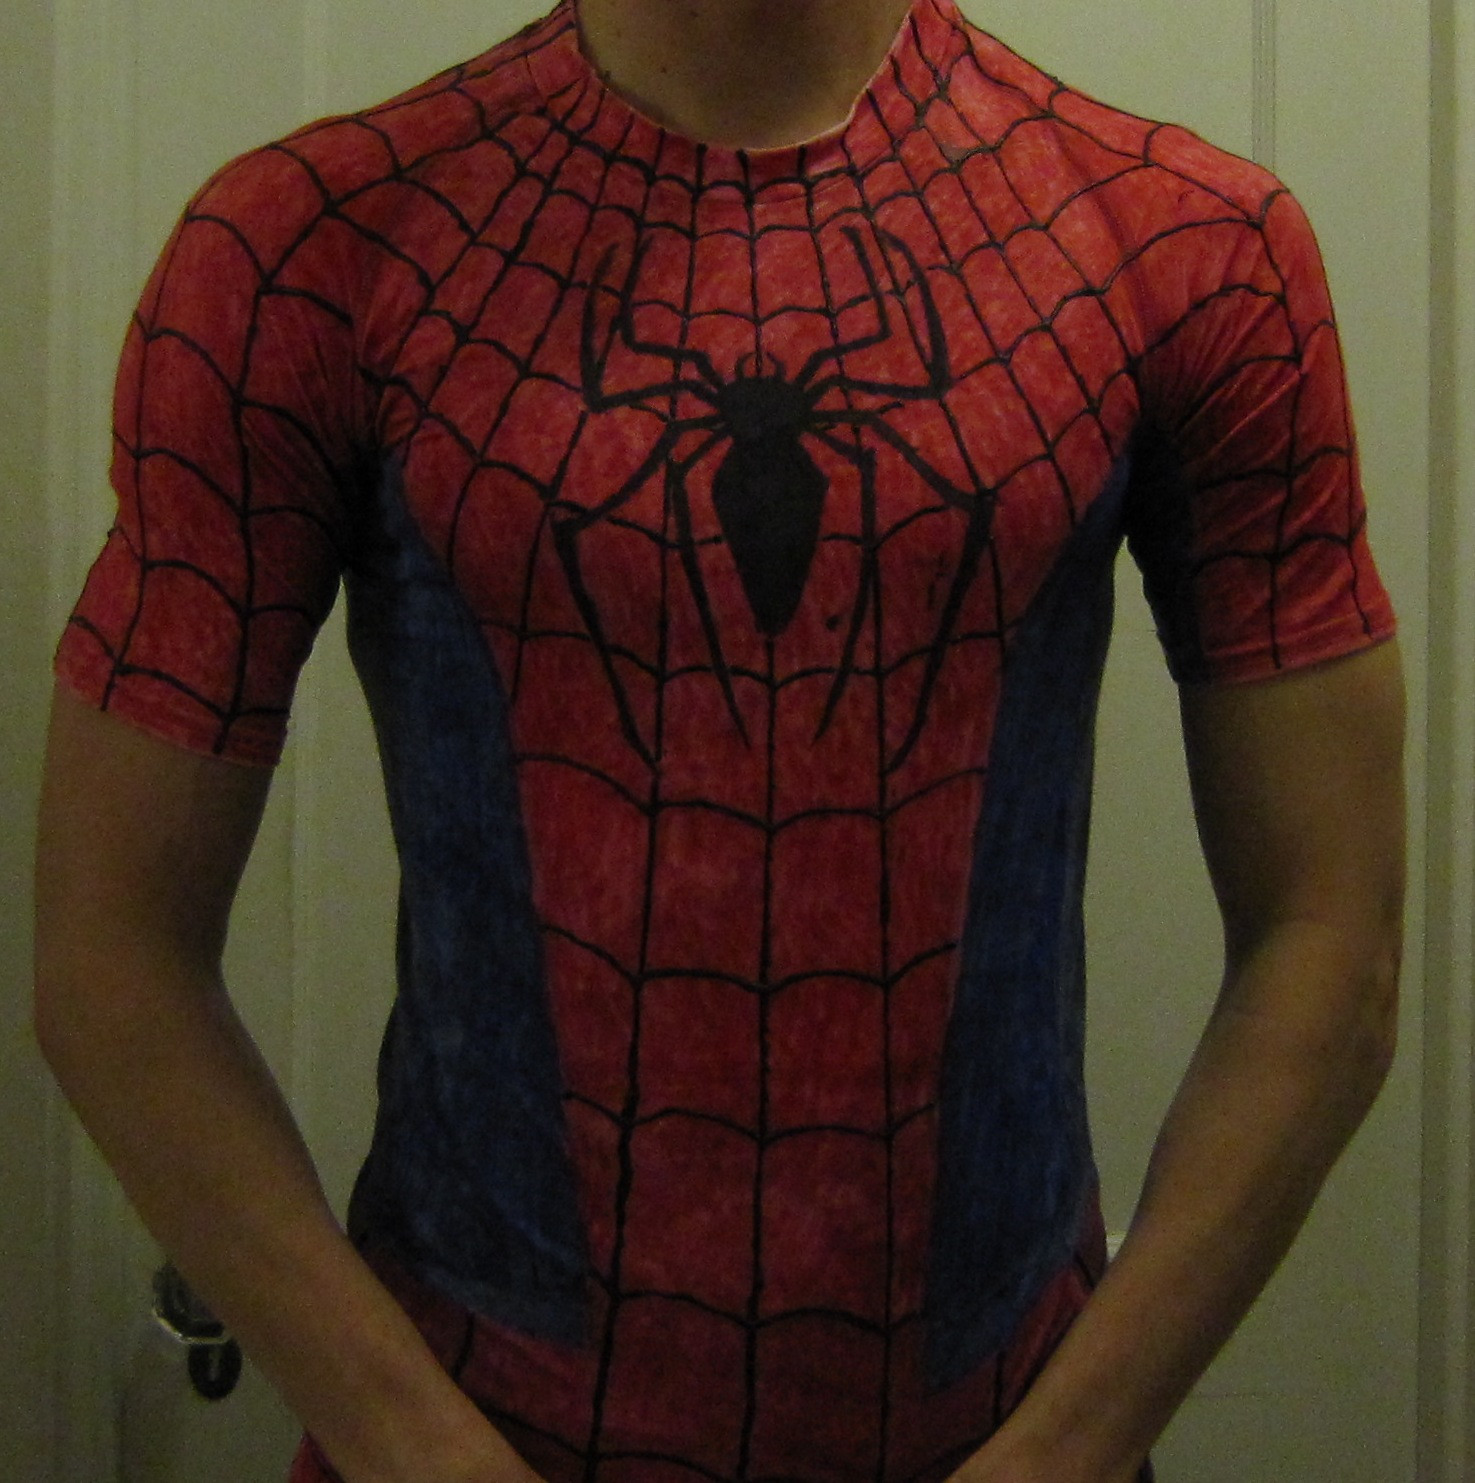 DIY Spiderman Mask
 Chuck Does Art DIY do it yourself Costume Spider Man